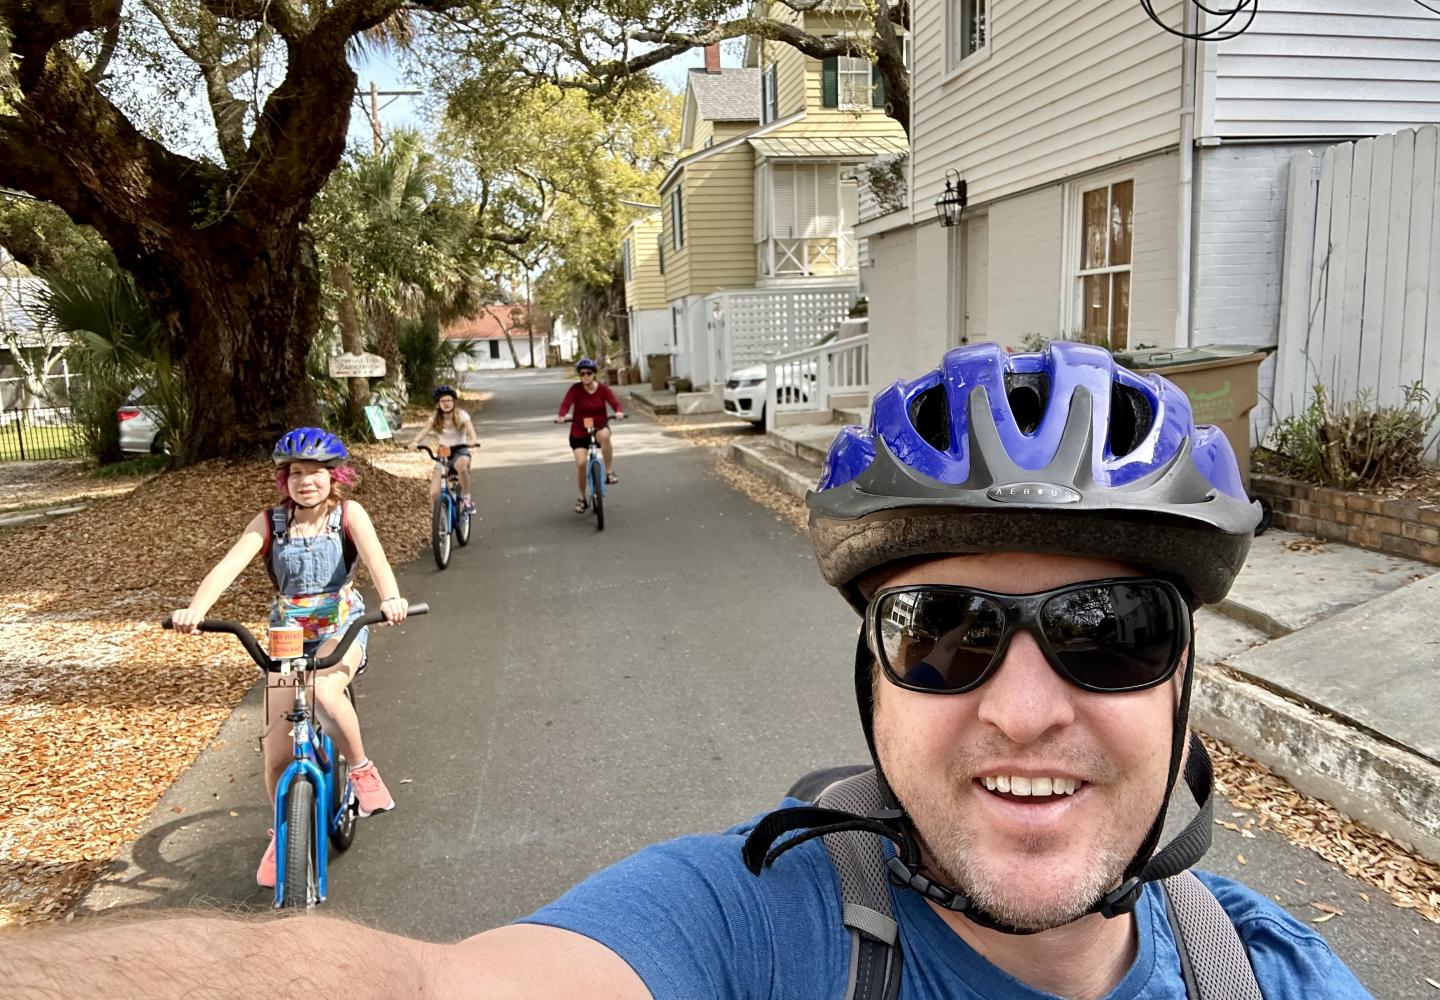 The Tybee Island Bike Route is perfect for beach cruising with your family.